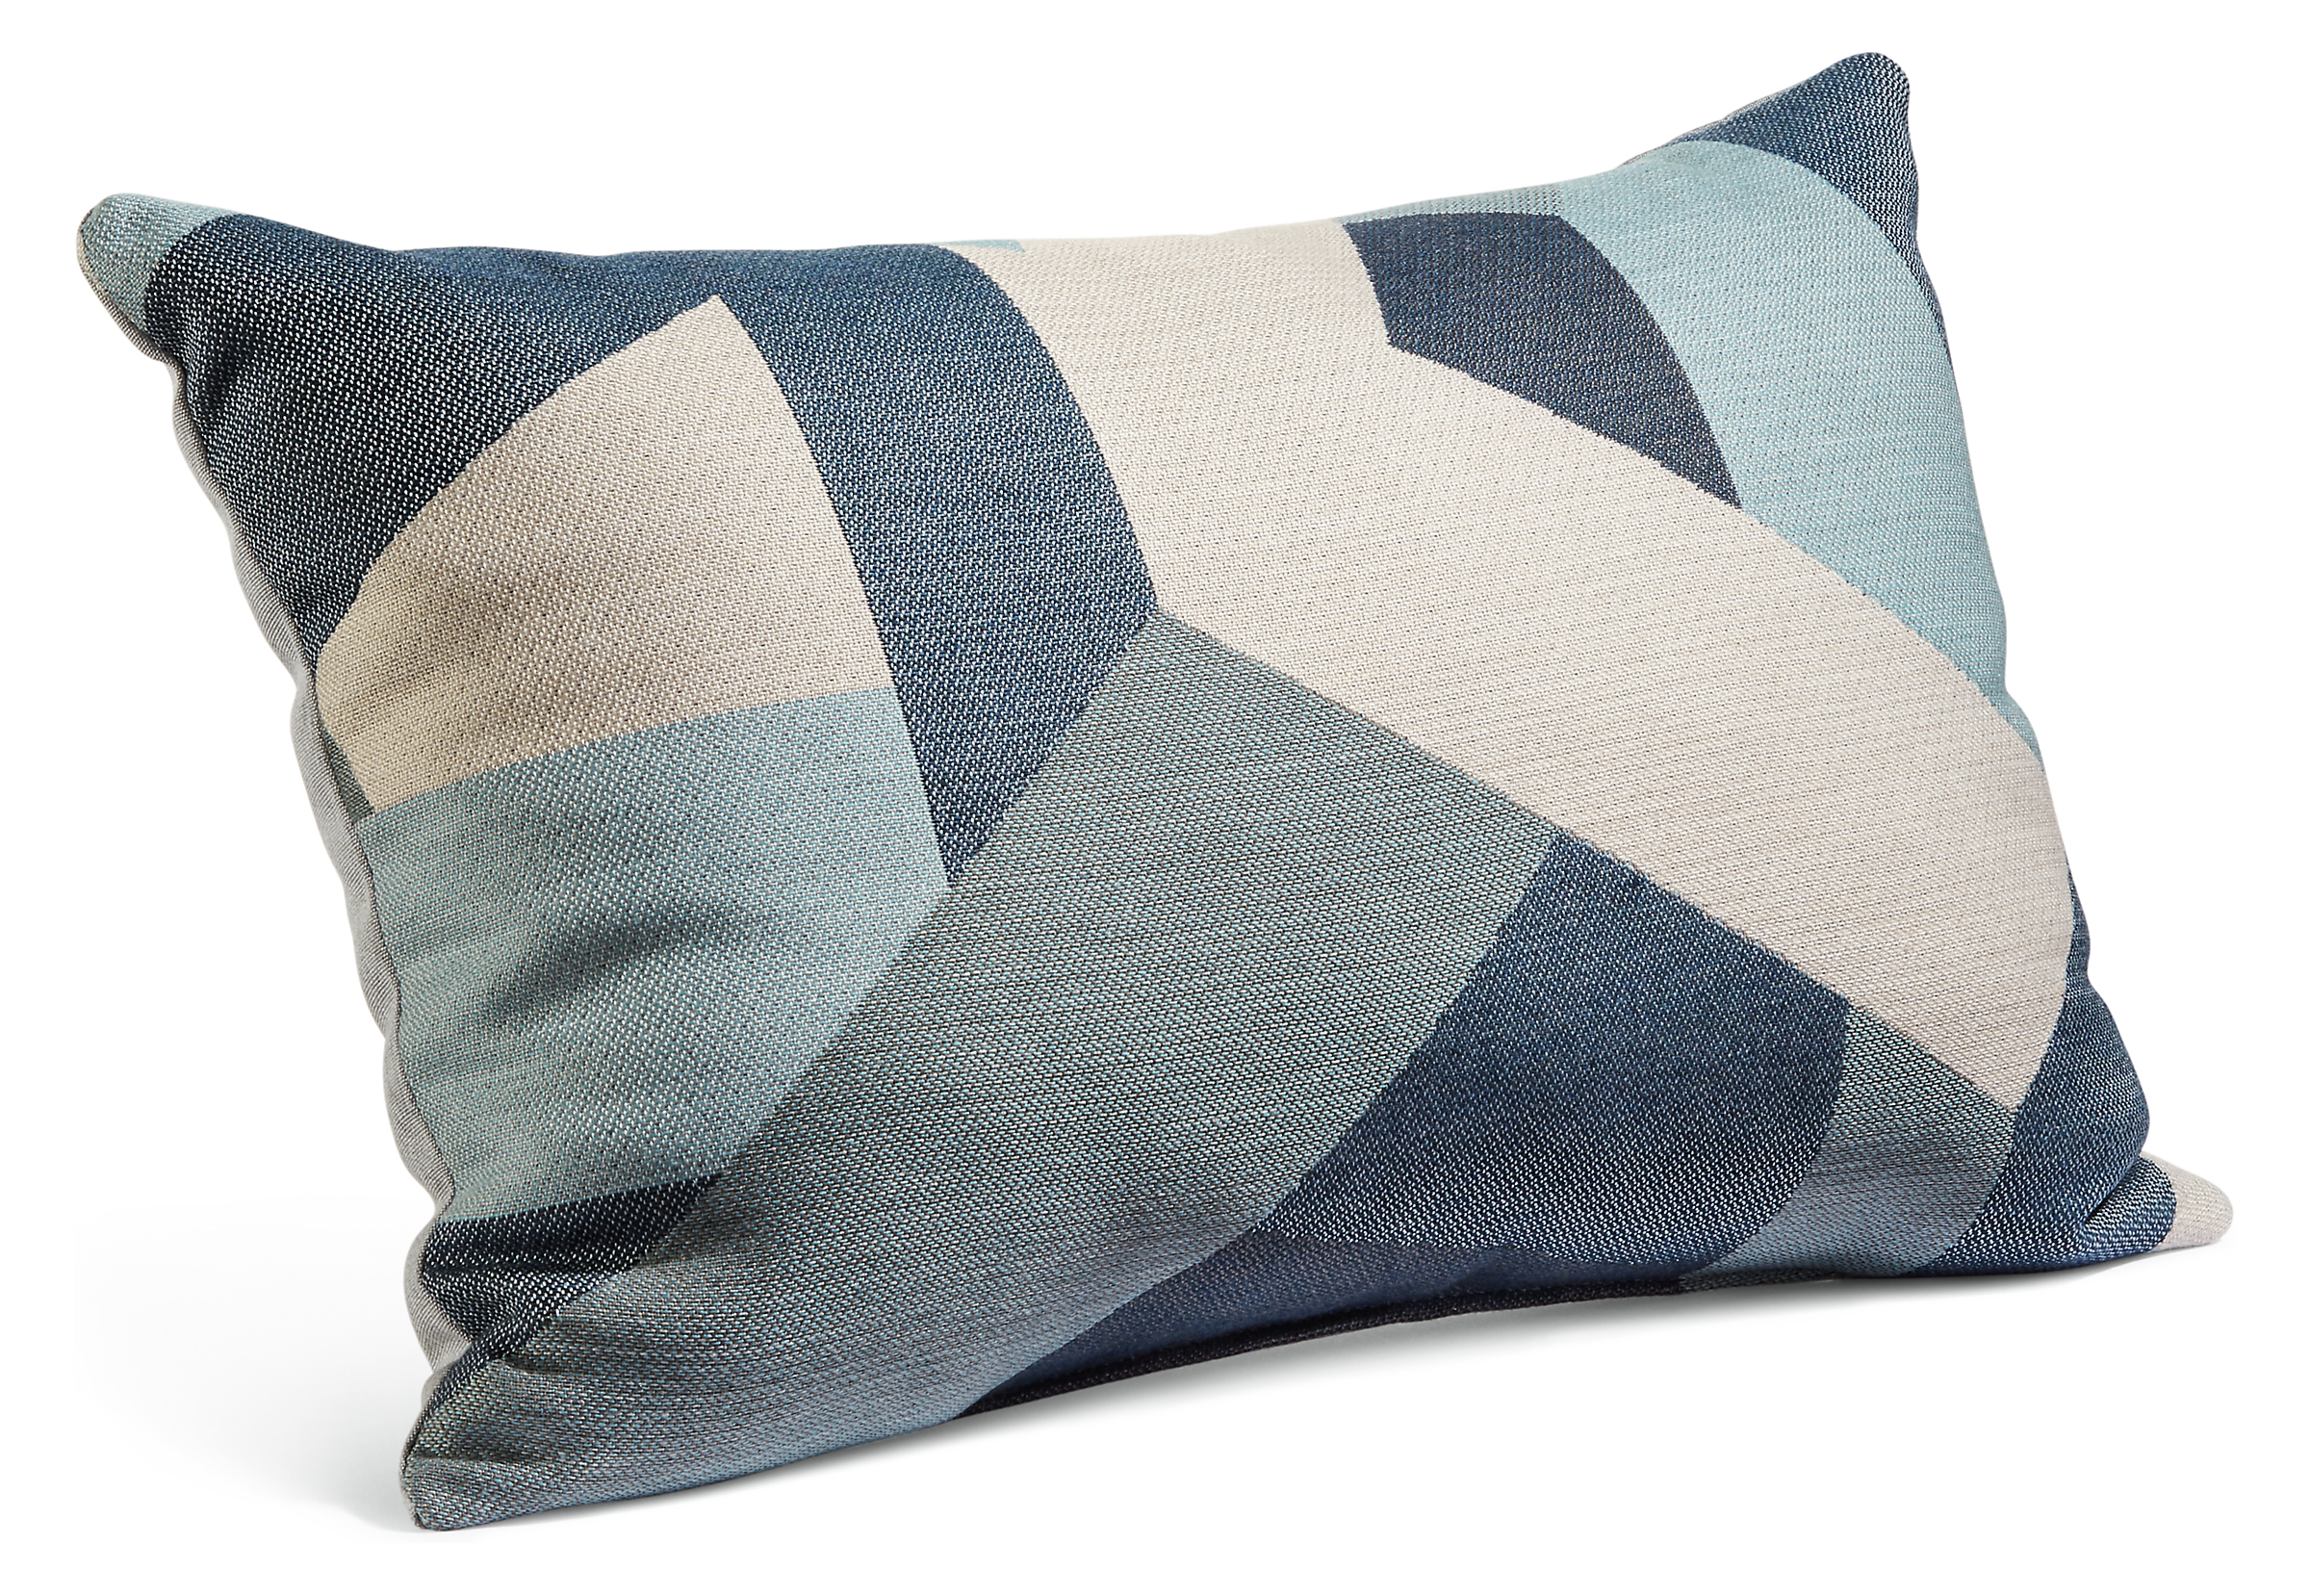 Refract 20w 13h Outdoor Pillow in Wye Blue/Cement